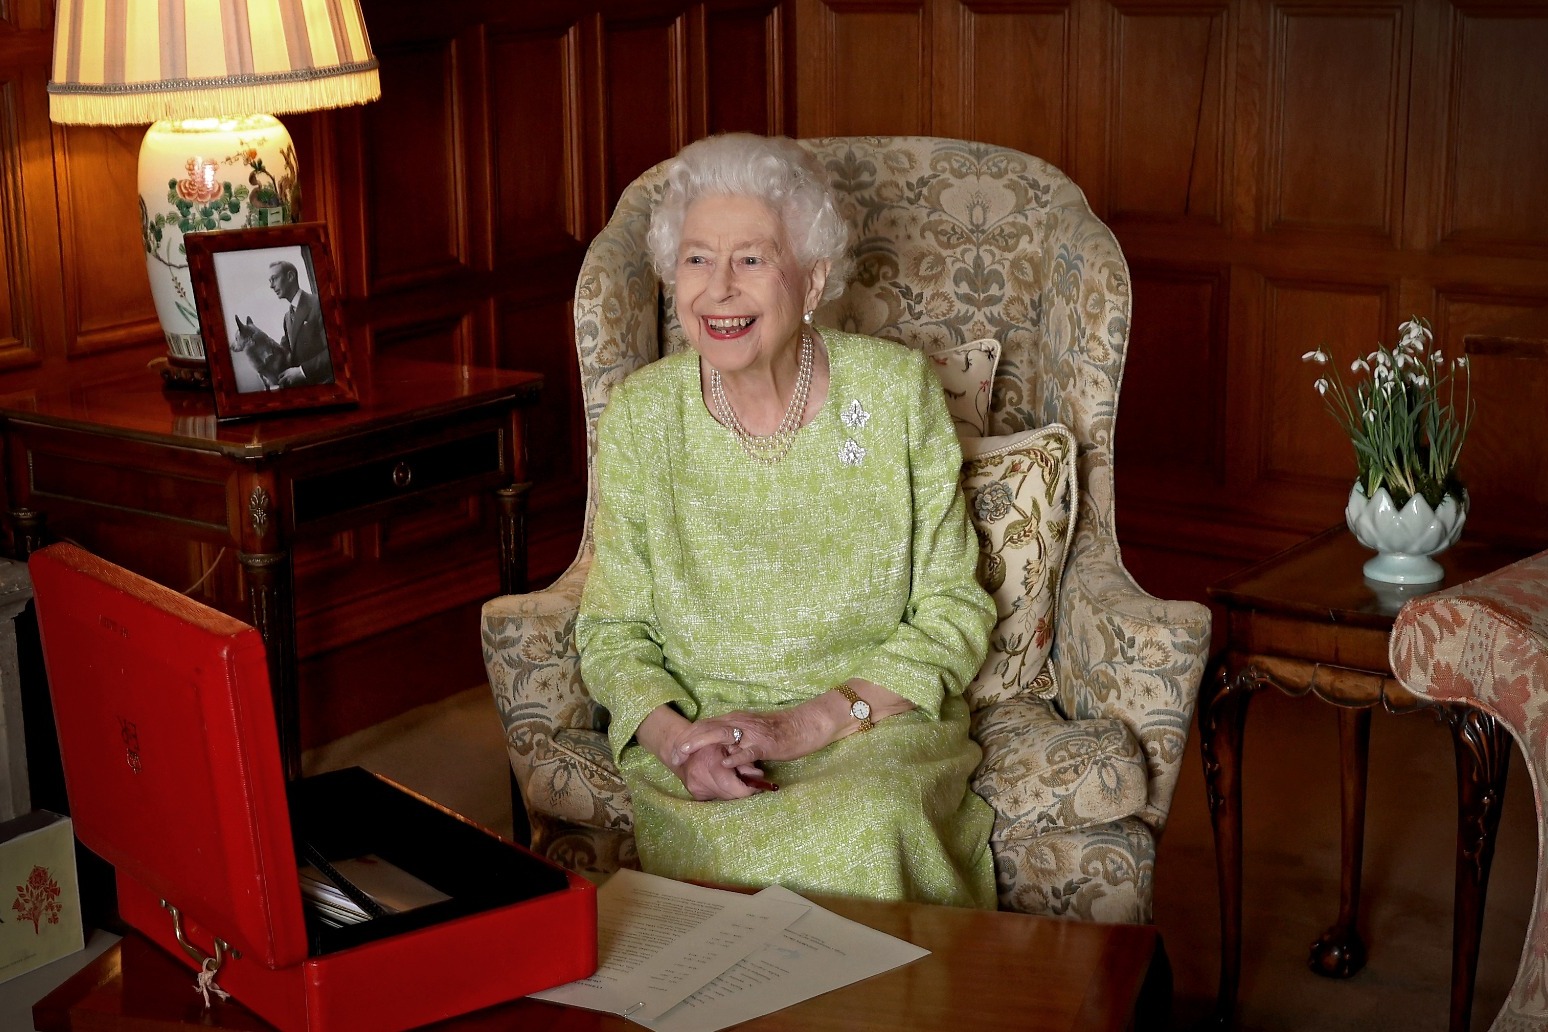 Queen pictured working in new image released for 70-year milestone 